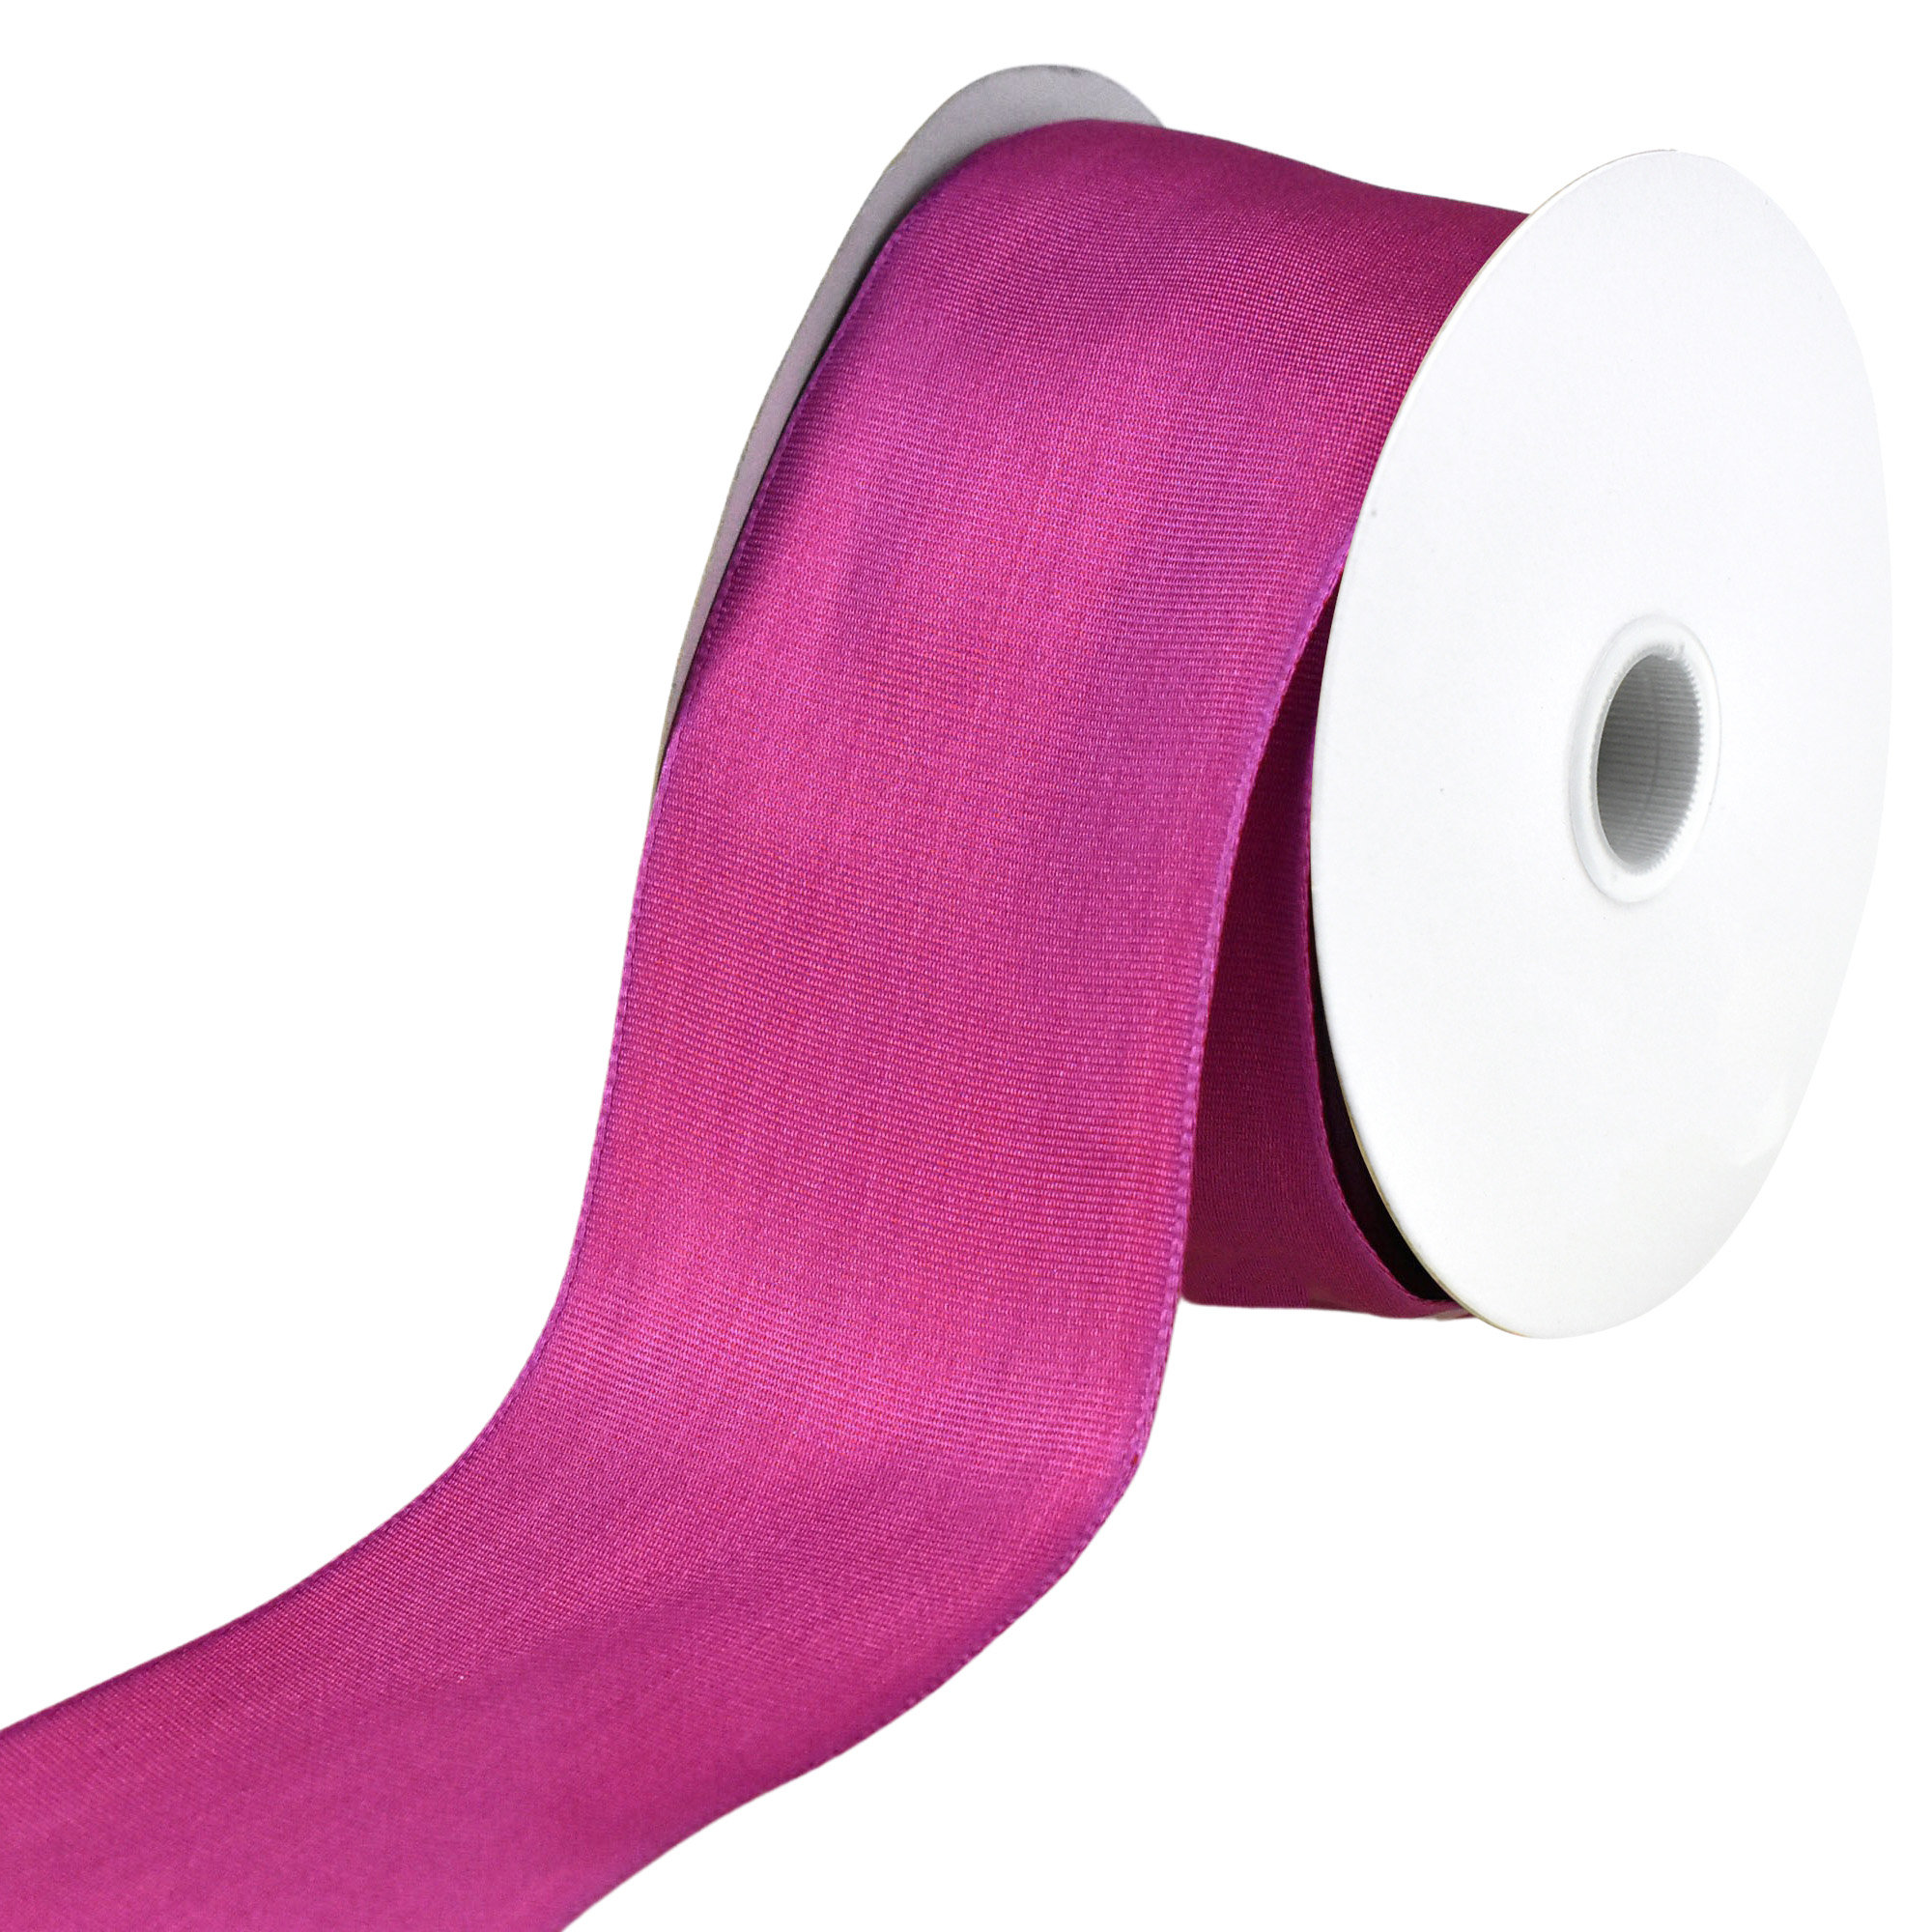 Two-Toned Grosgrain Wired Ribbon, 2-1/2-inch, 25-yard, Hot Pink